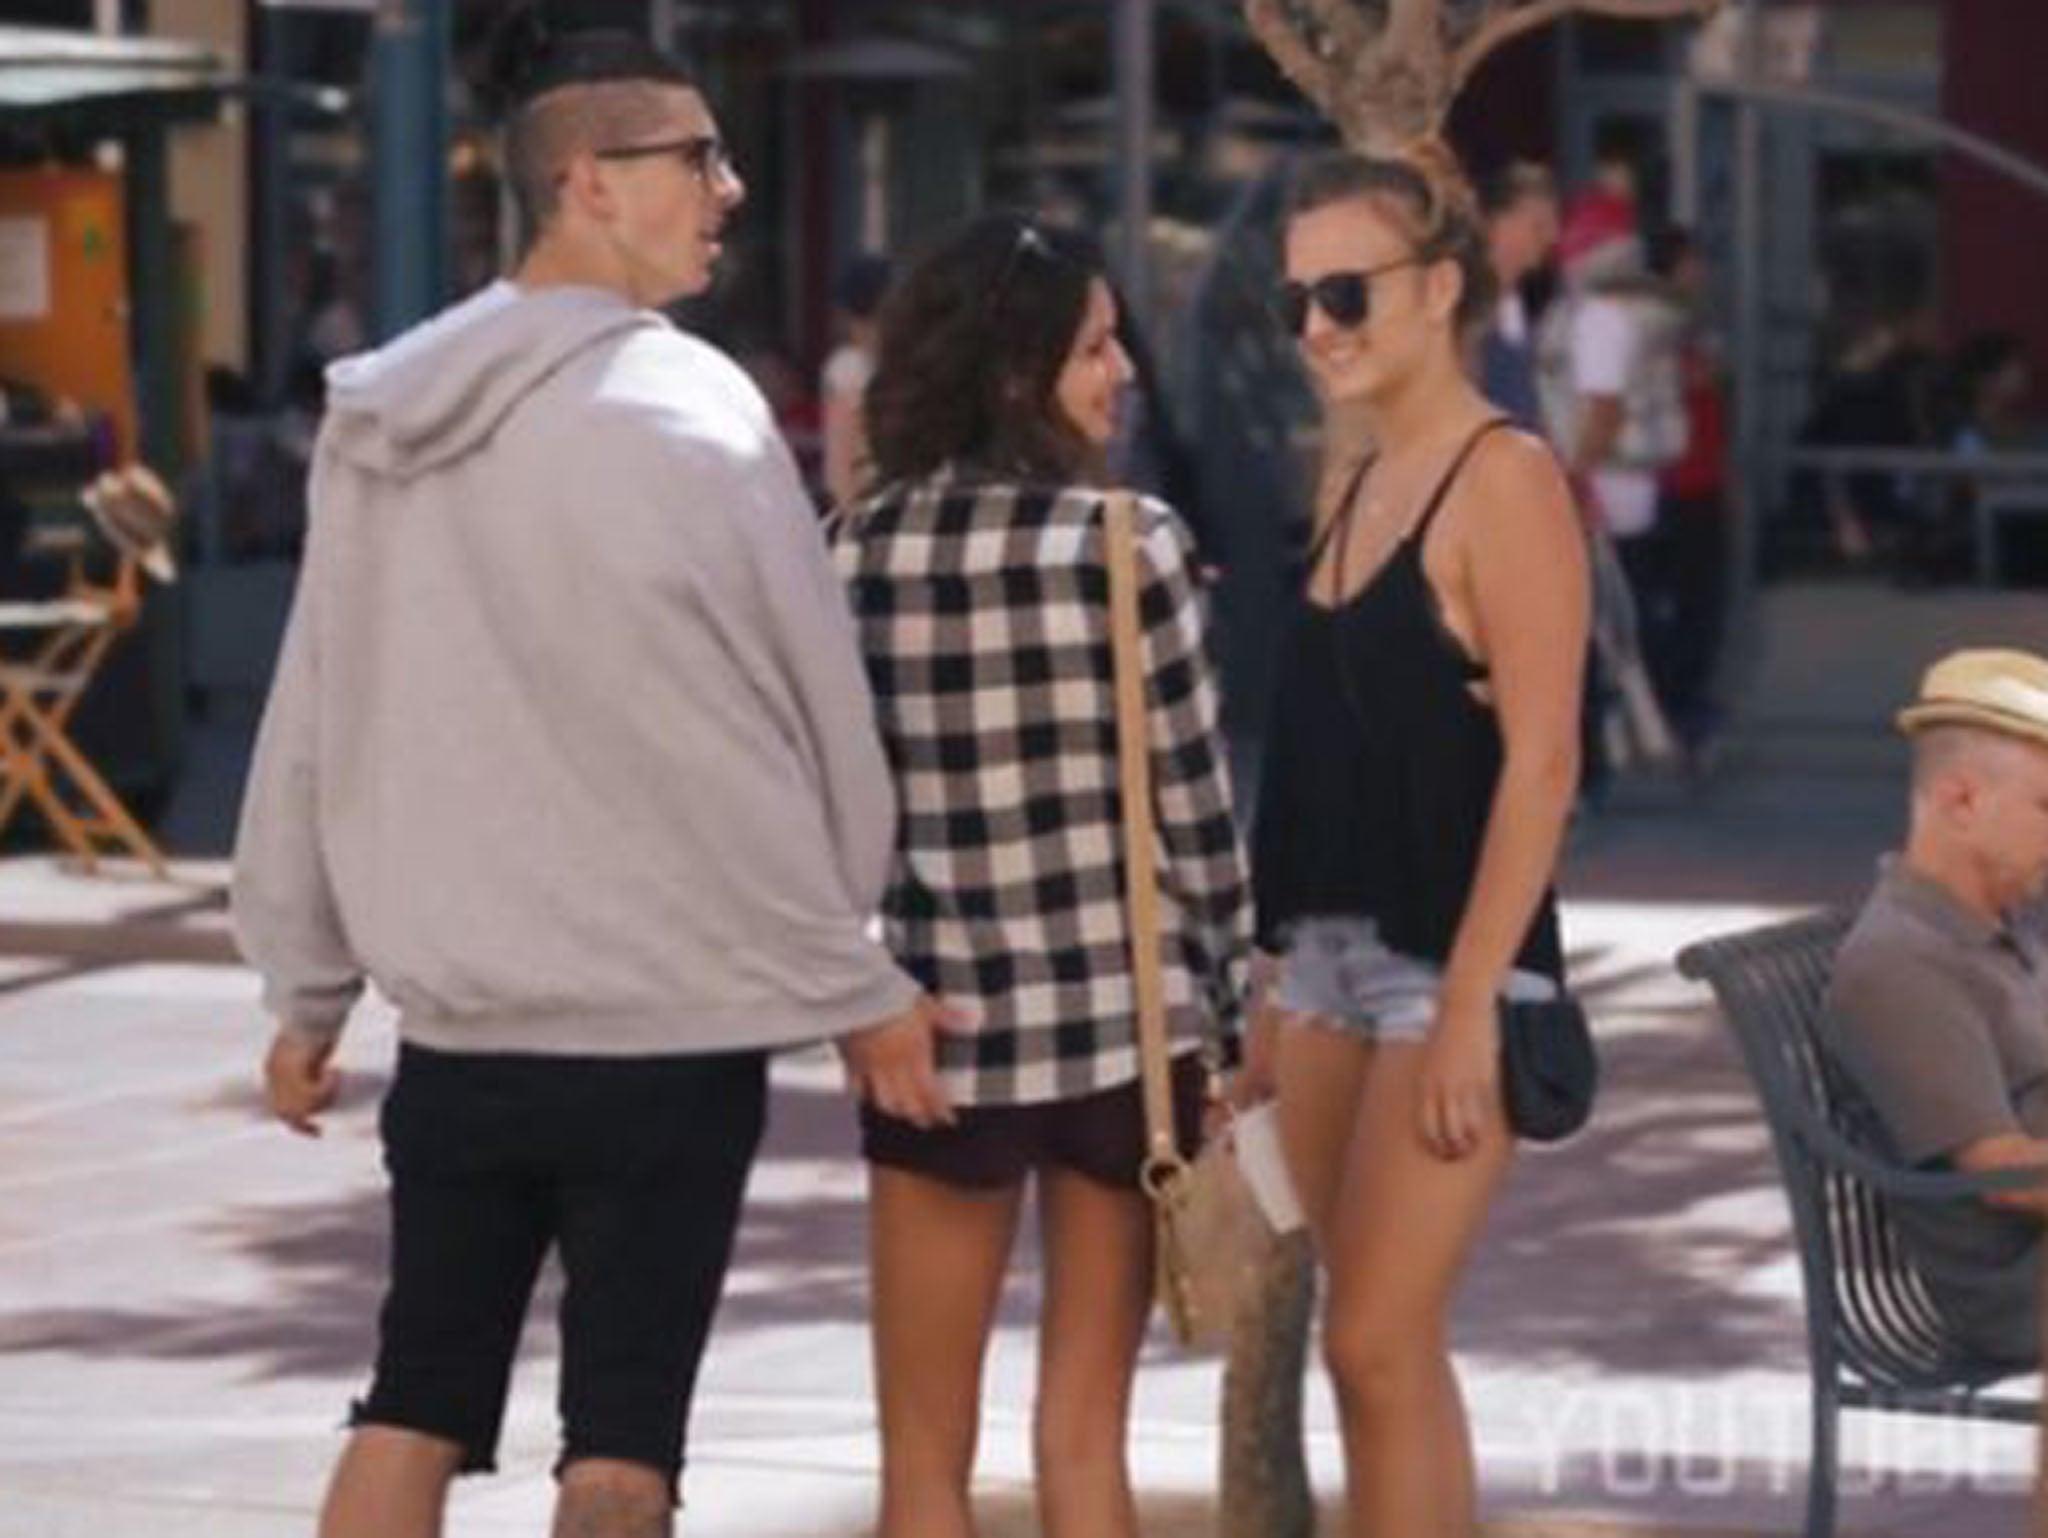 Sam Pepper's first video showed him appearing to pinch the bottoms of random female members of the public